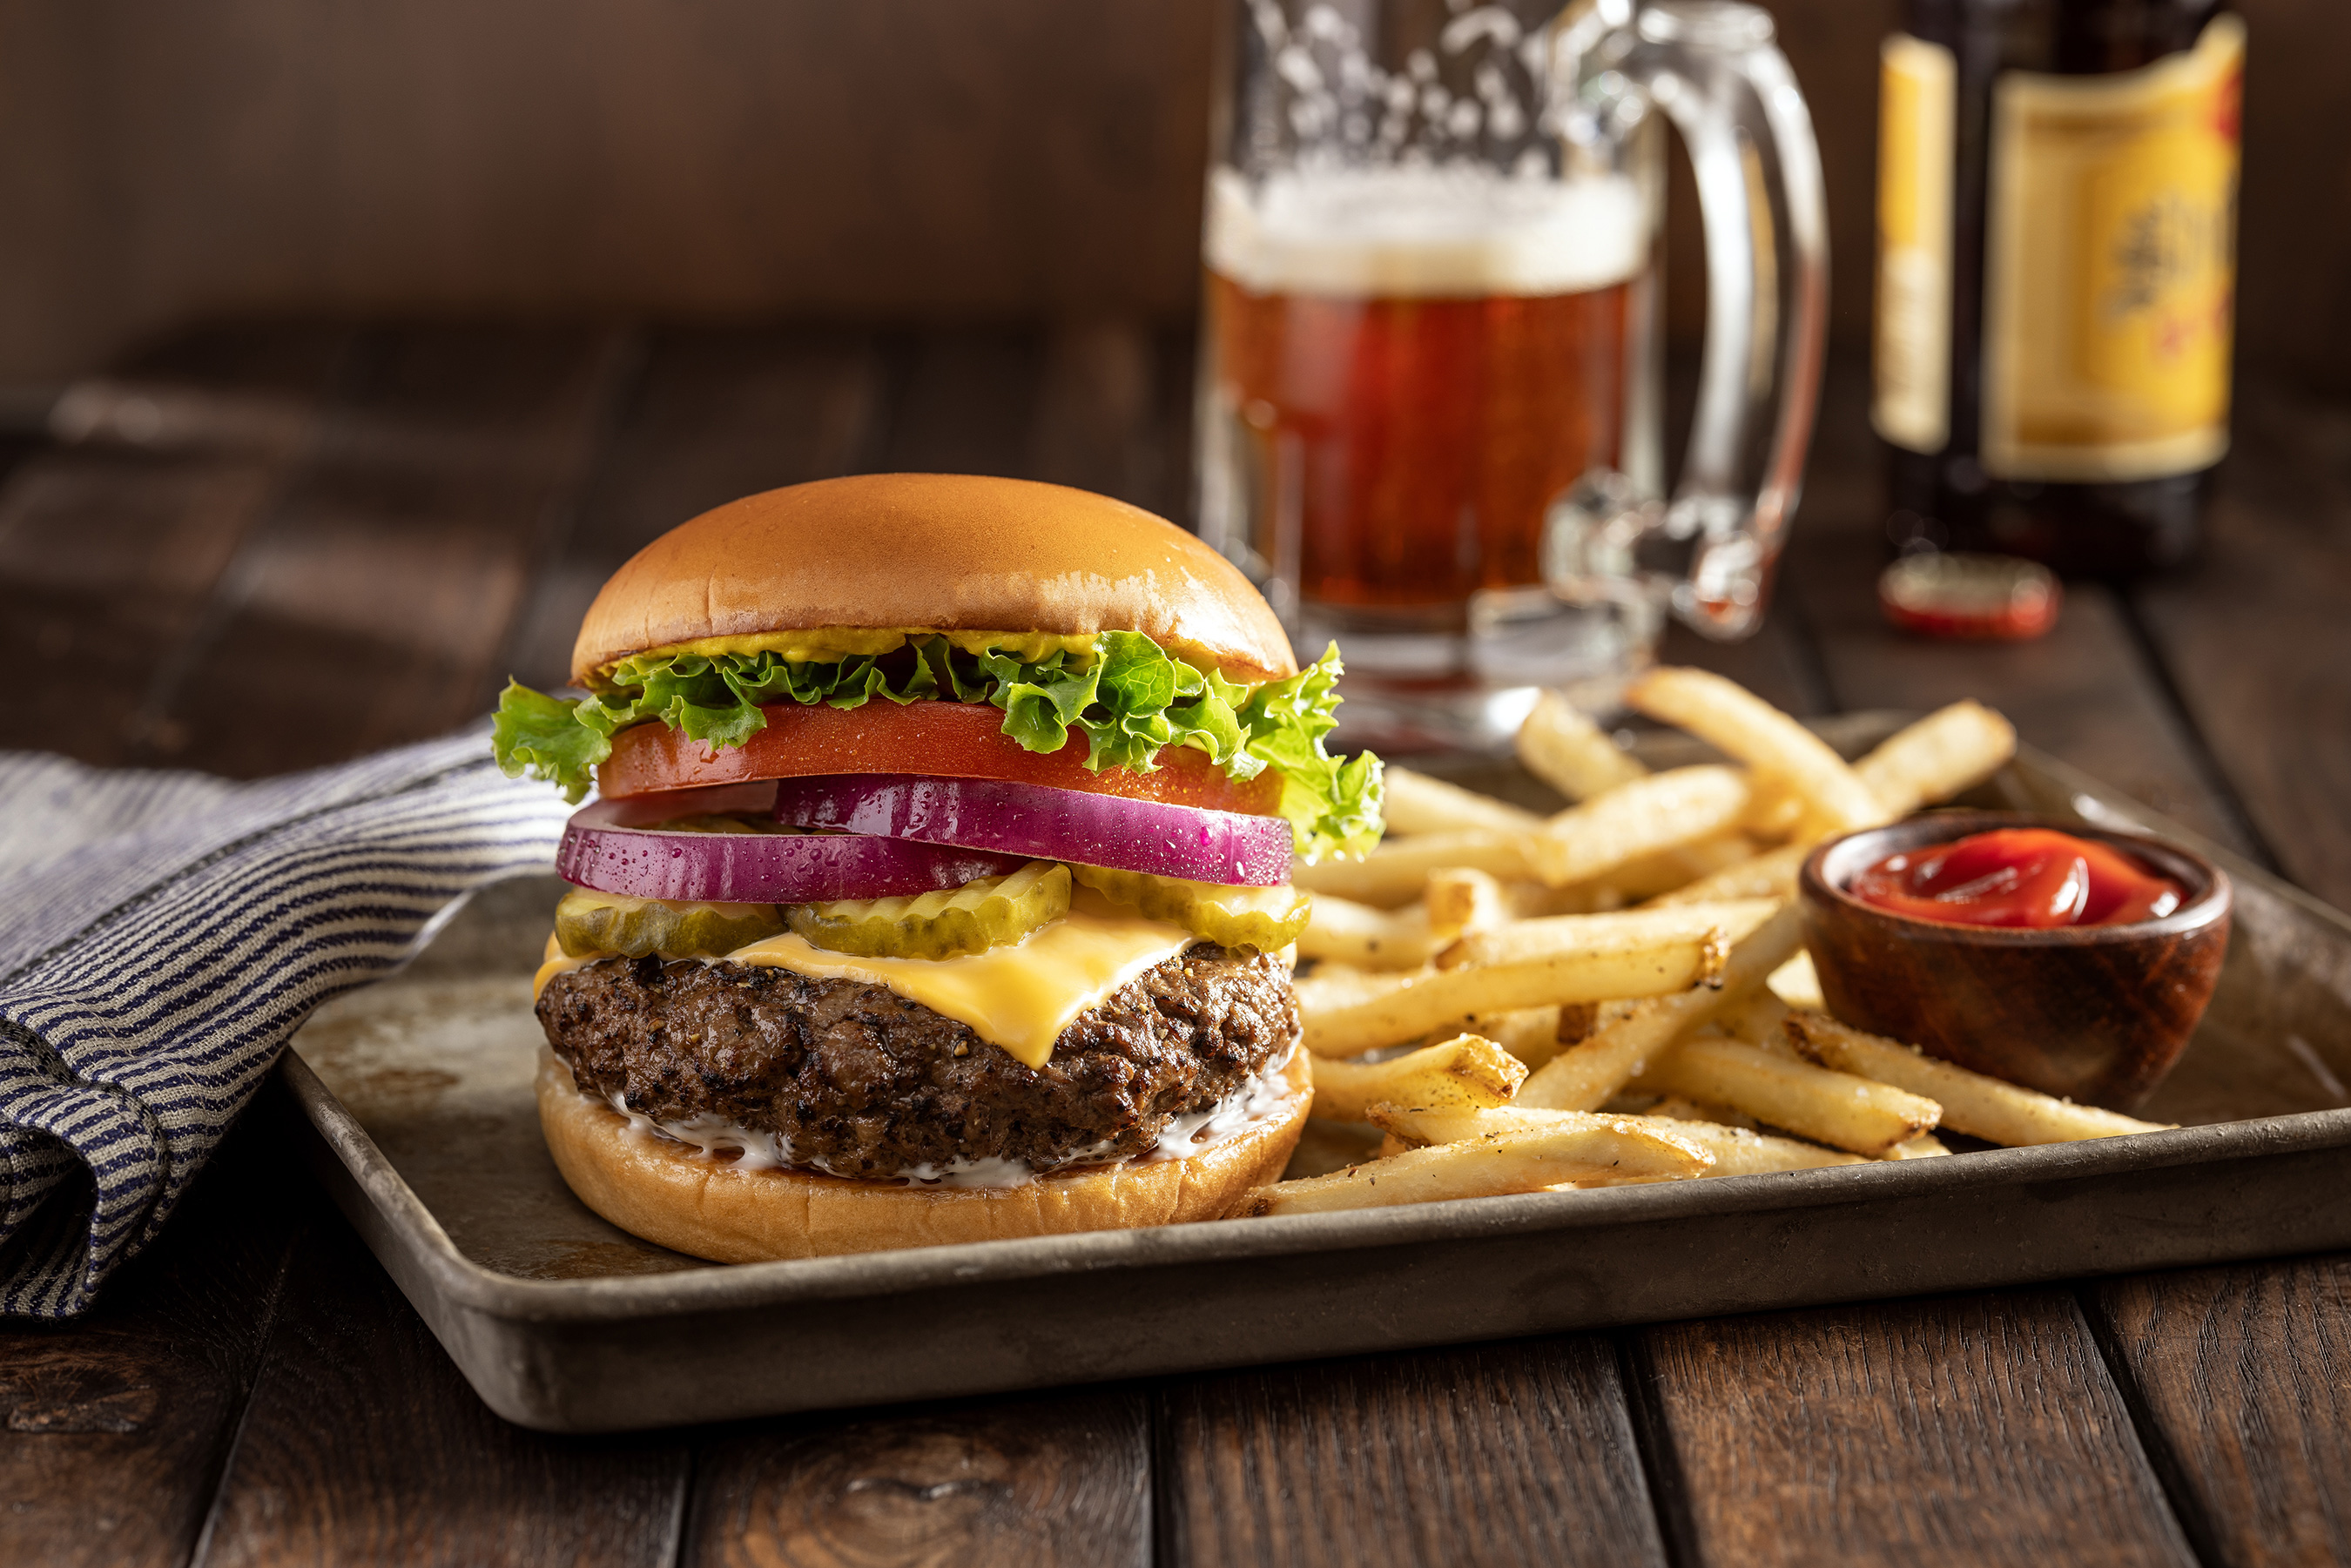 cheeseburger and french fries cold beer alyssa wernick food stylist styling dallas tx